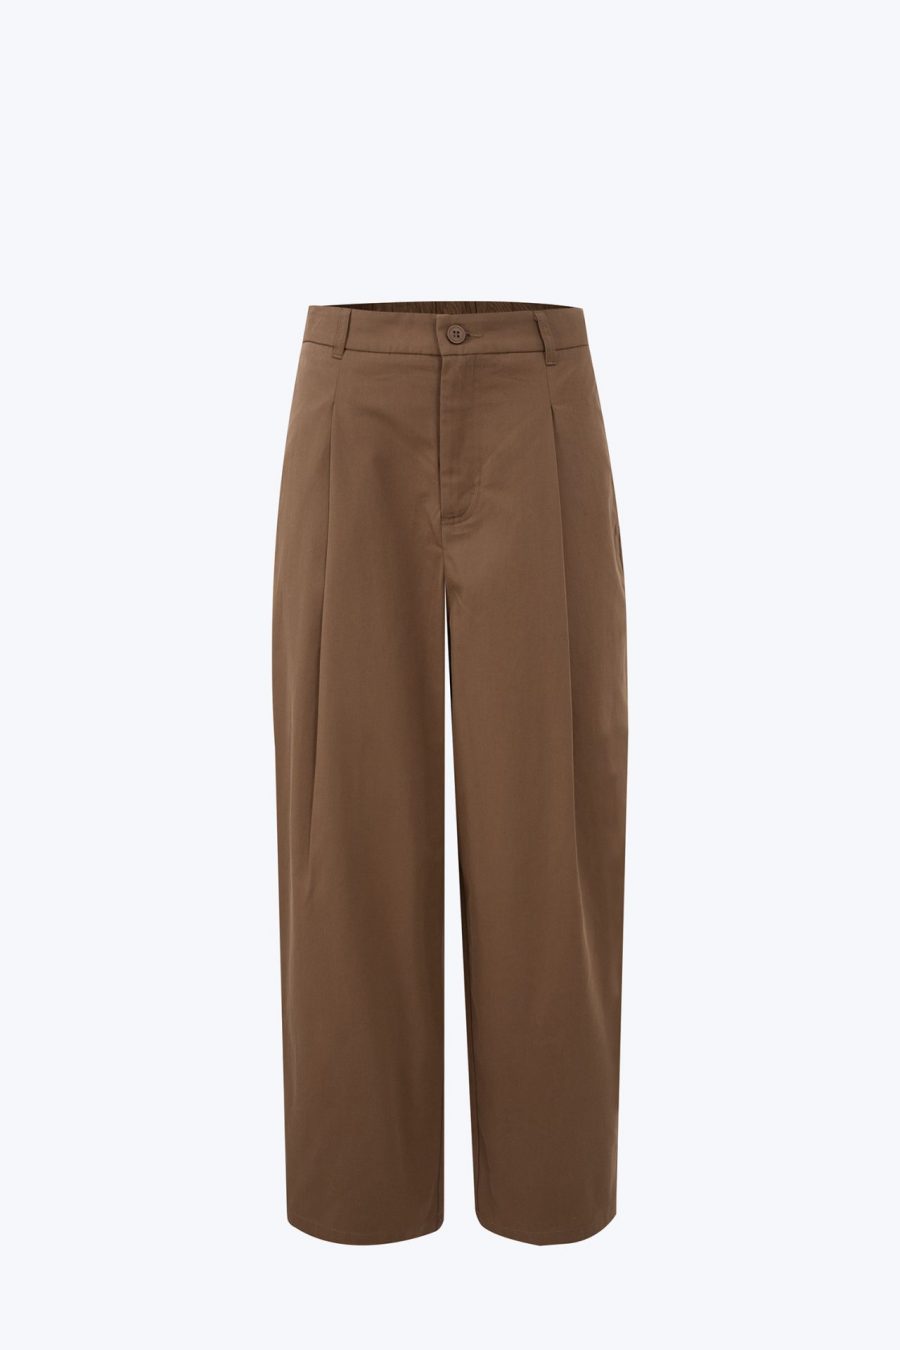 CPL001173A Pleated Pants COCOA